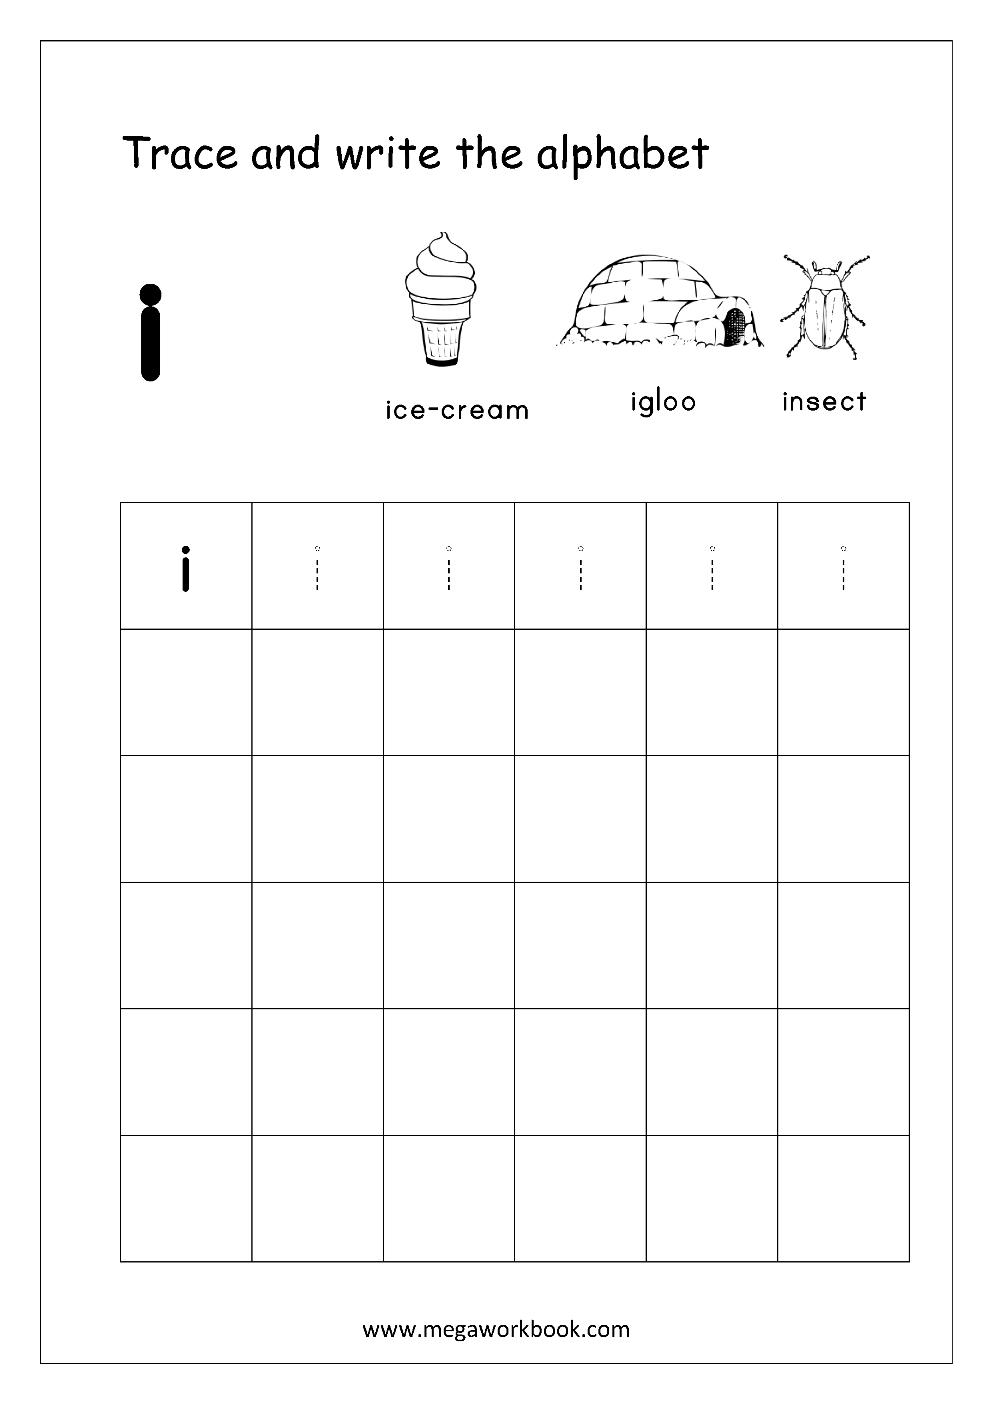 free-english-worksheets-alphabet-writing-small-letters-letter